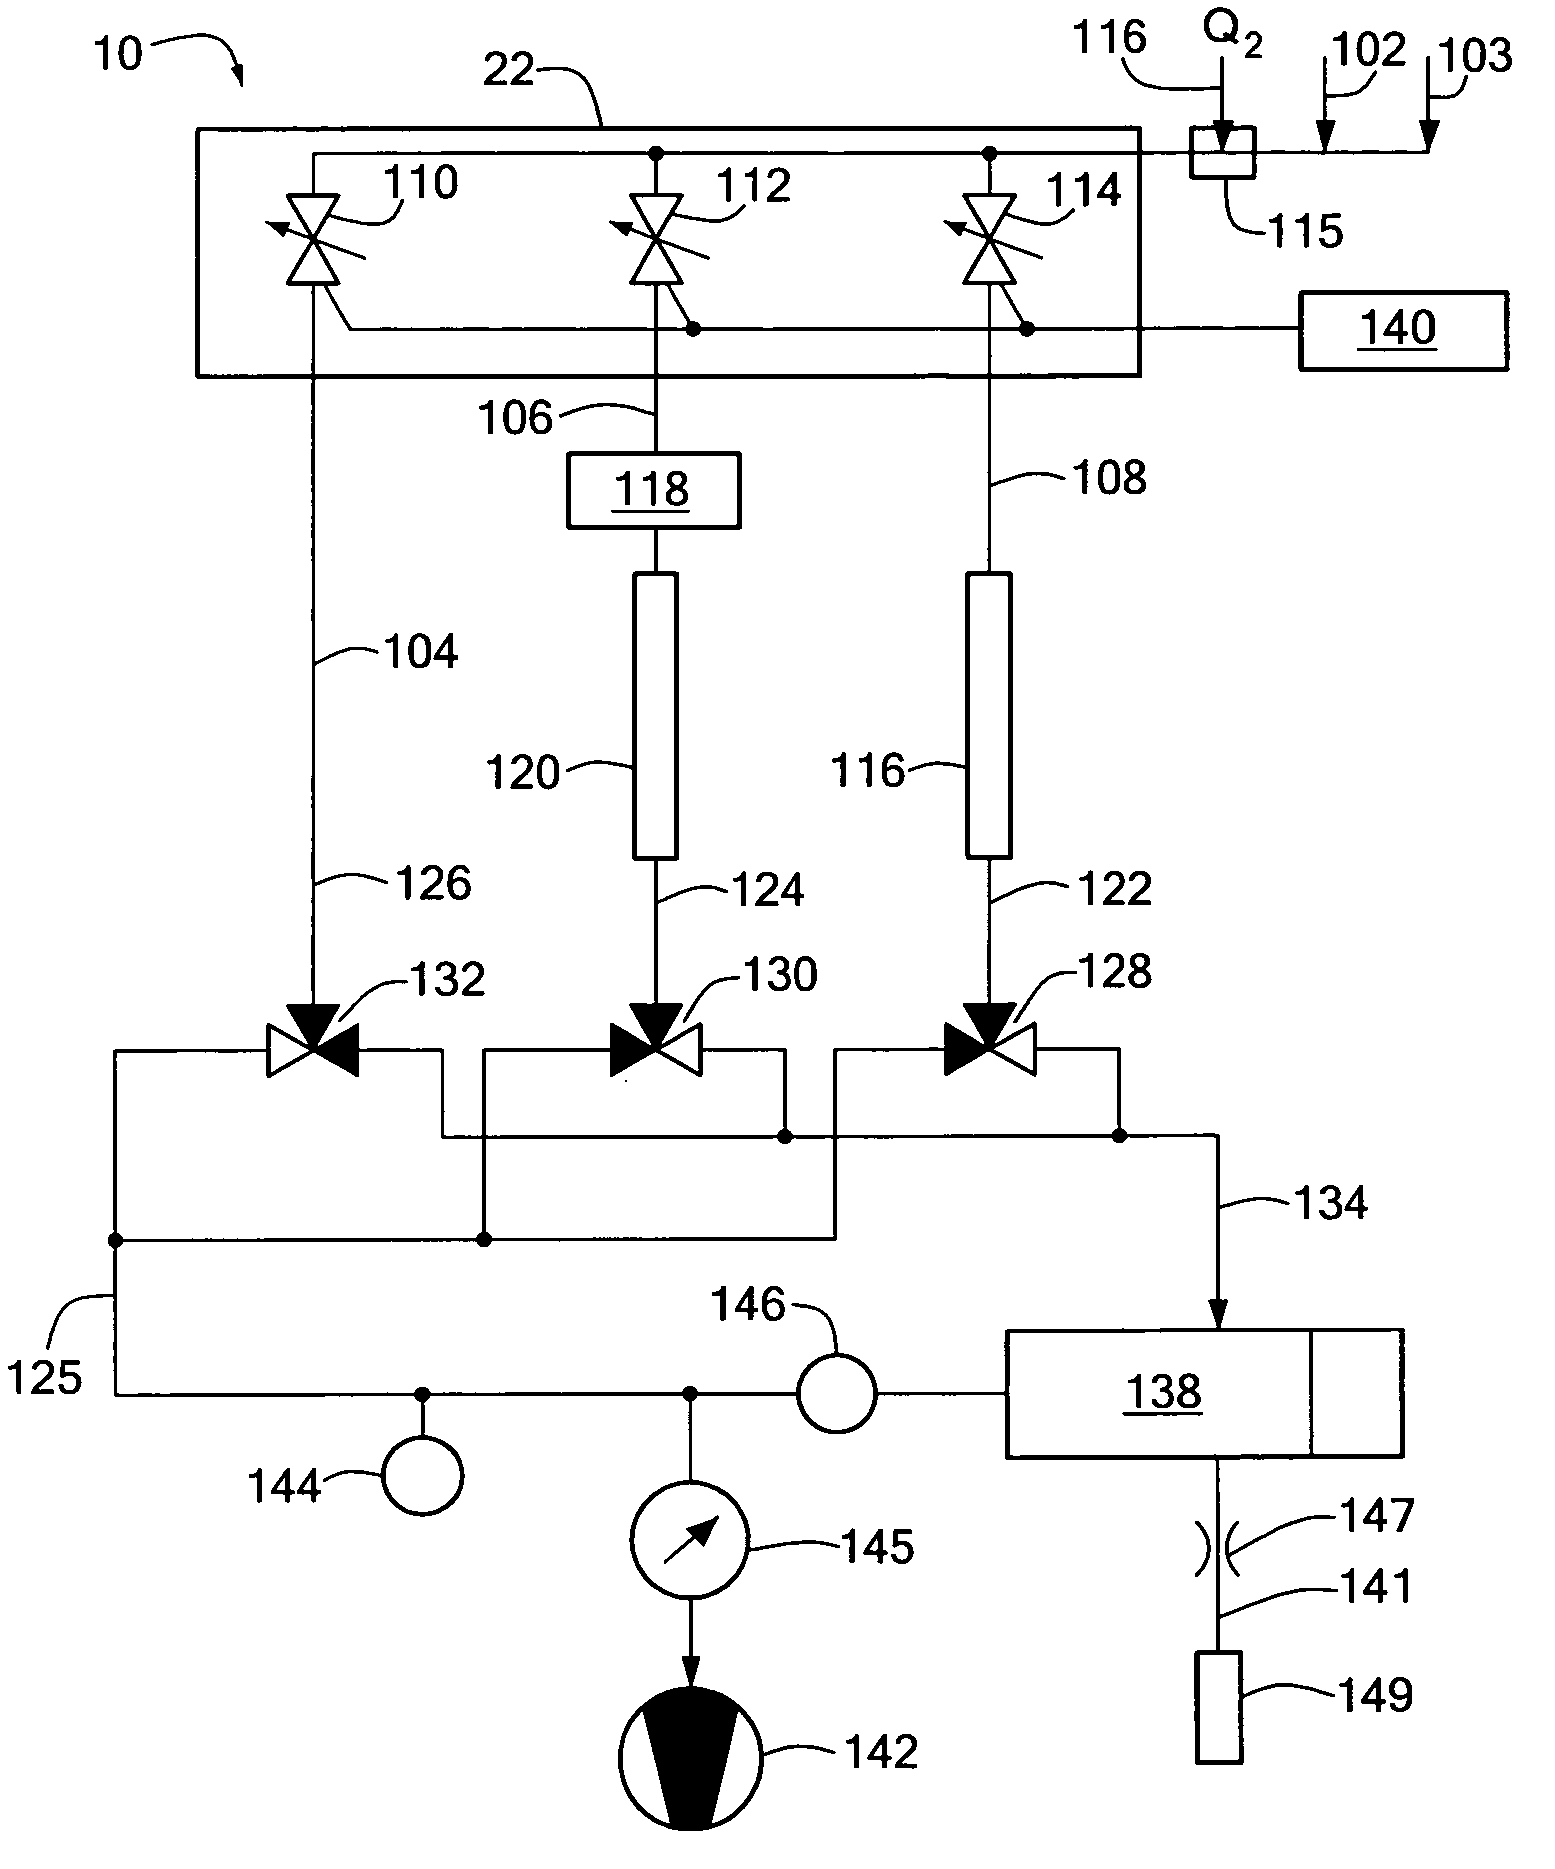 Method and apparatus for improving measuring accuracy in gas monitoring systems